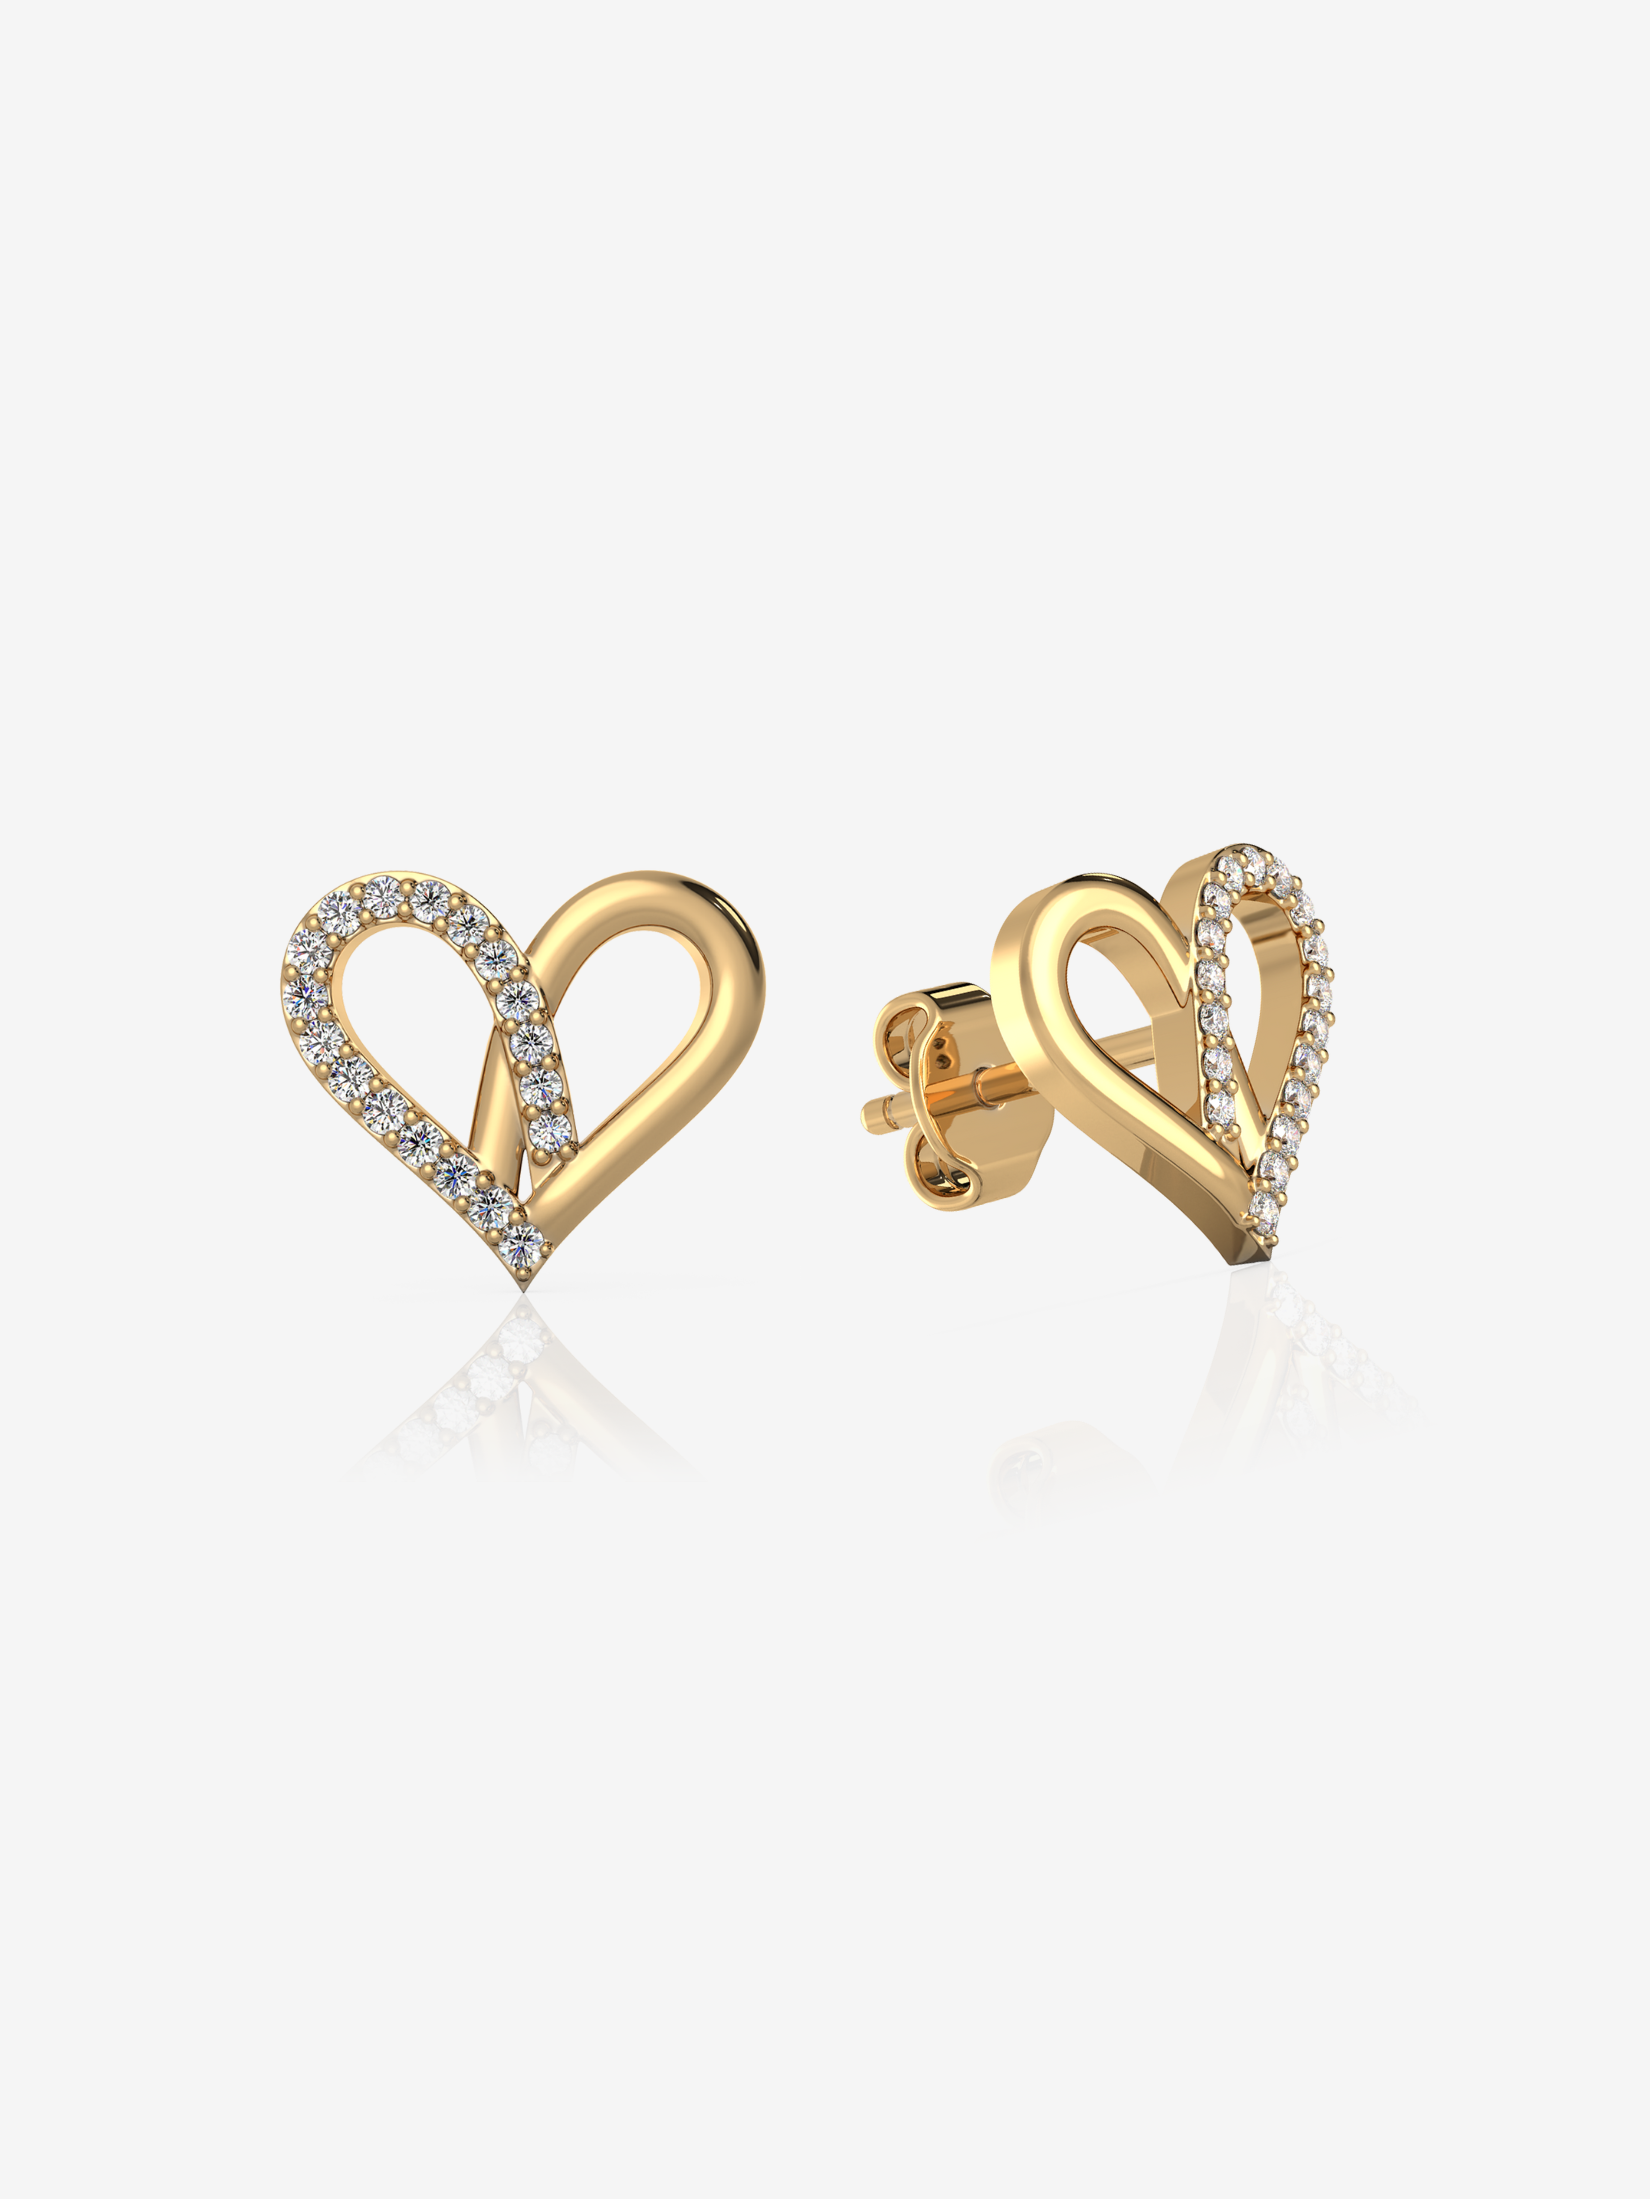 Attract Heart Earrings 925 Sterling Silver and 18k Gold Plated